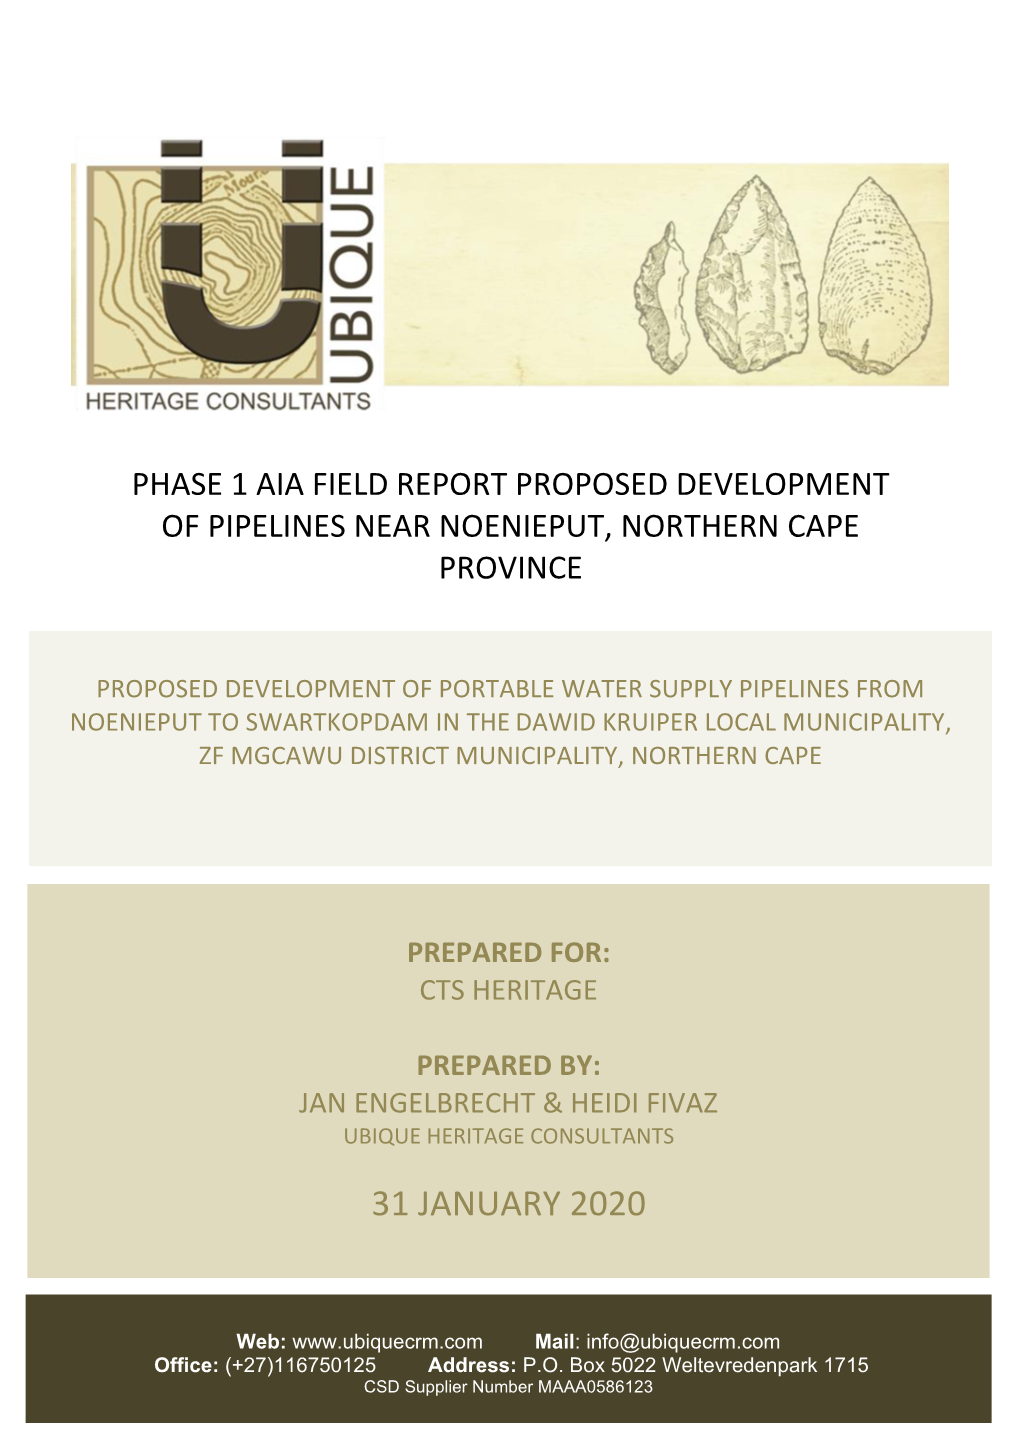 Phase 1 Aia Field Report Proposed Development of Pipelines Near Noenieput, Northern Cape Province